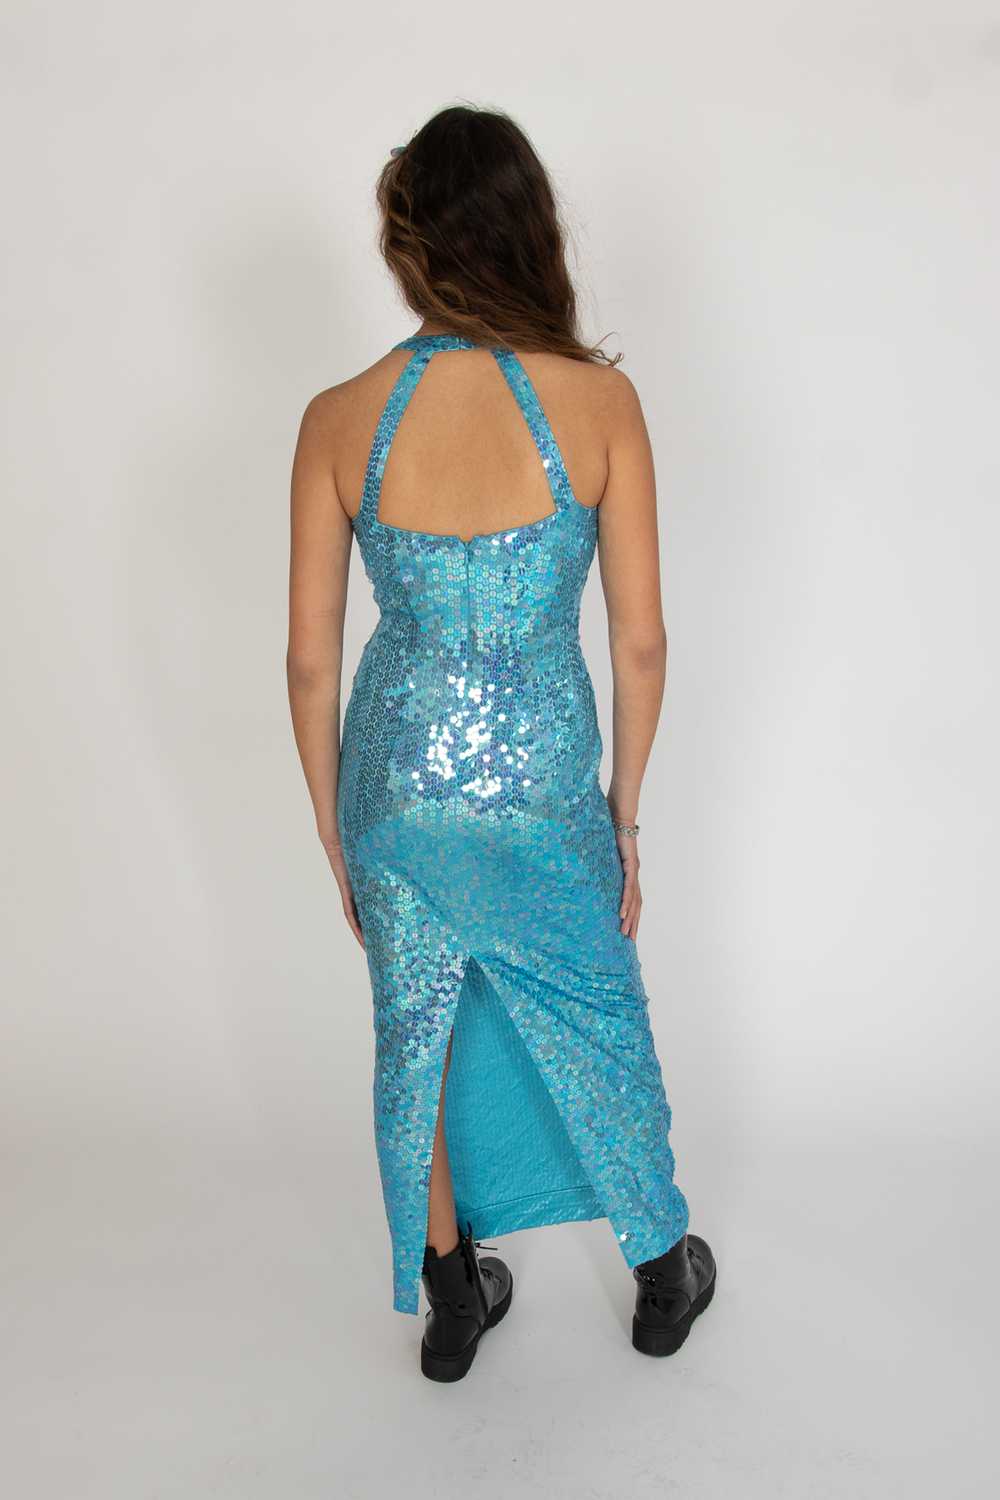 Vintage Adrianna Papell Blue Sequin Dress - image 5